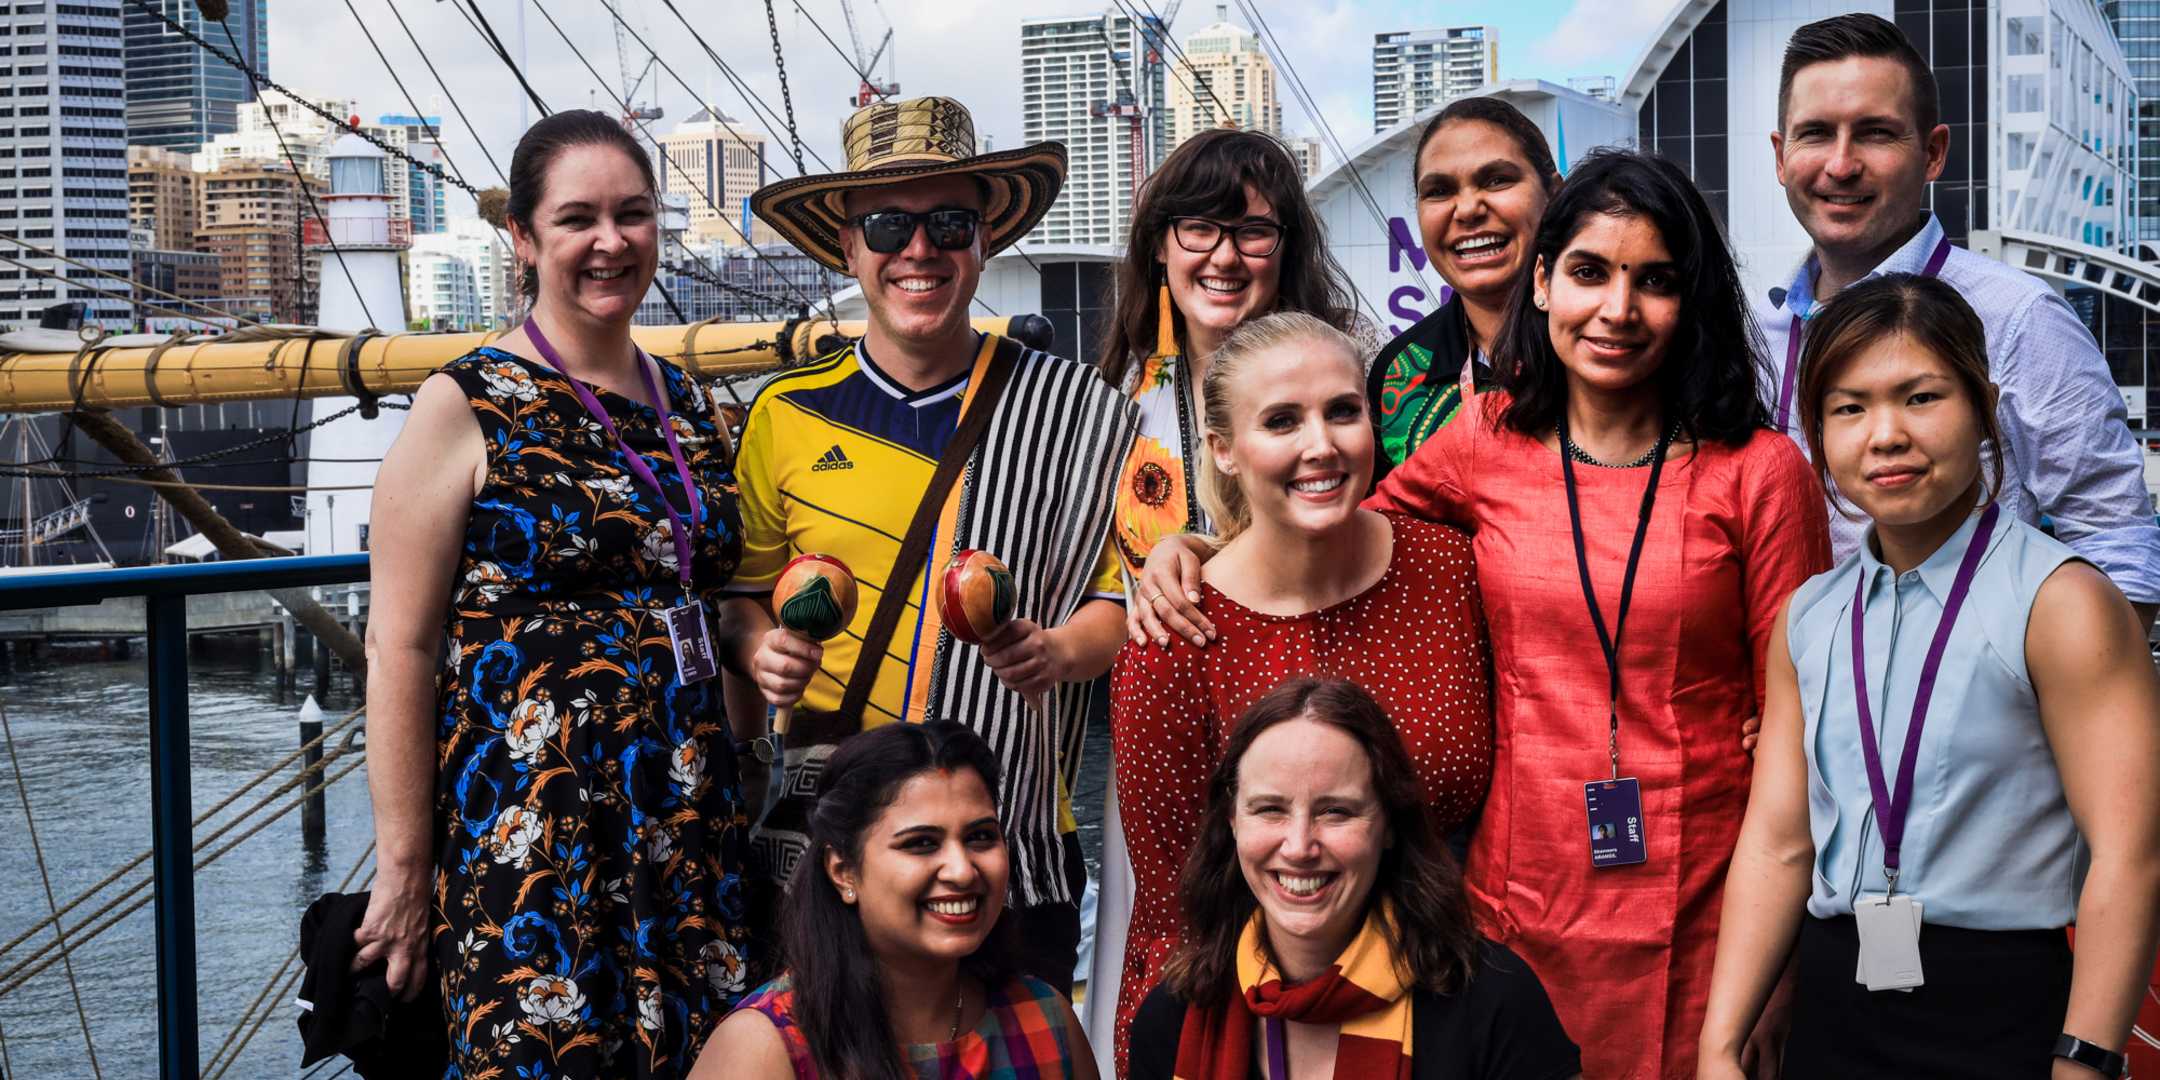 Museum staff for Harmony Day 2019